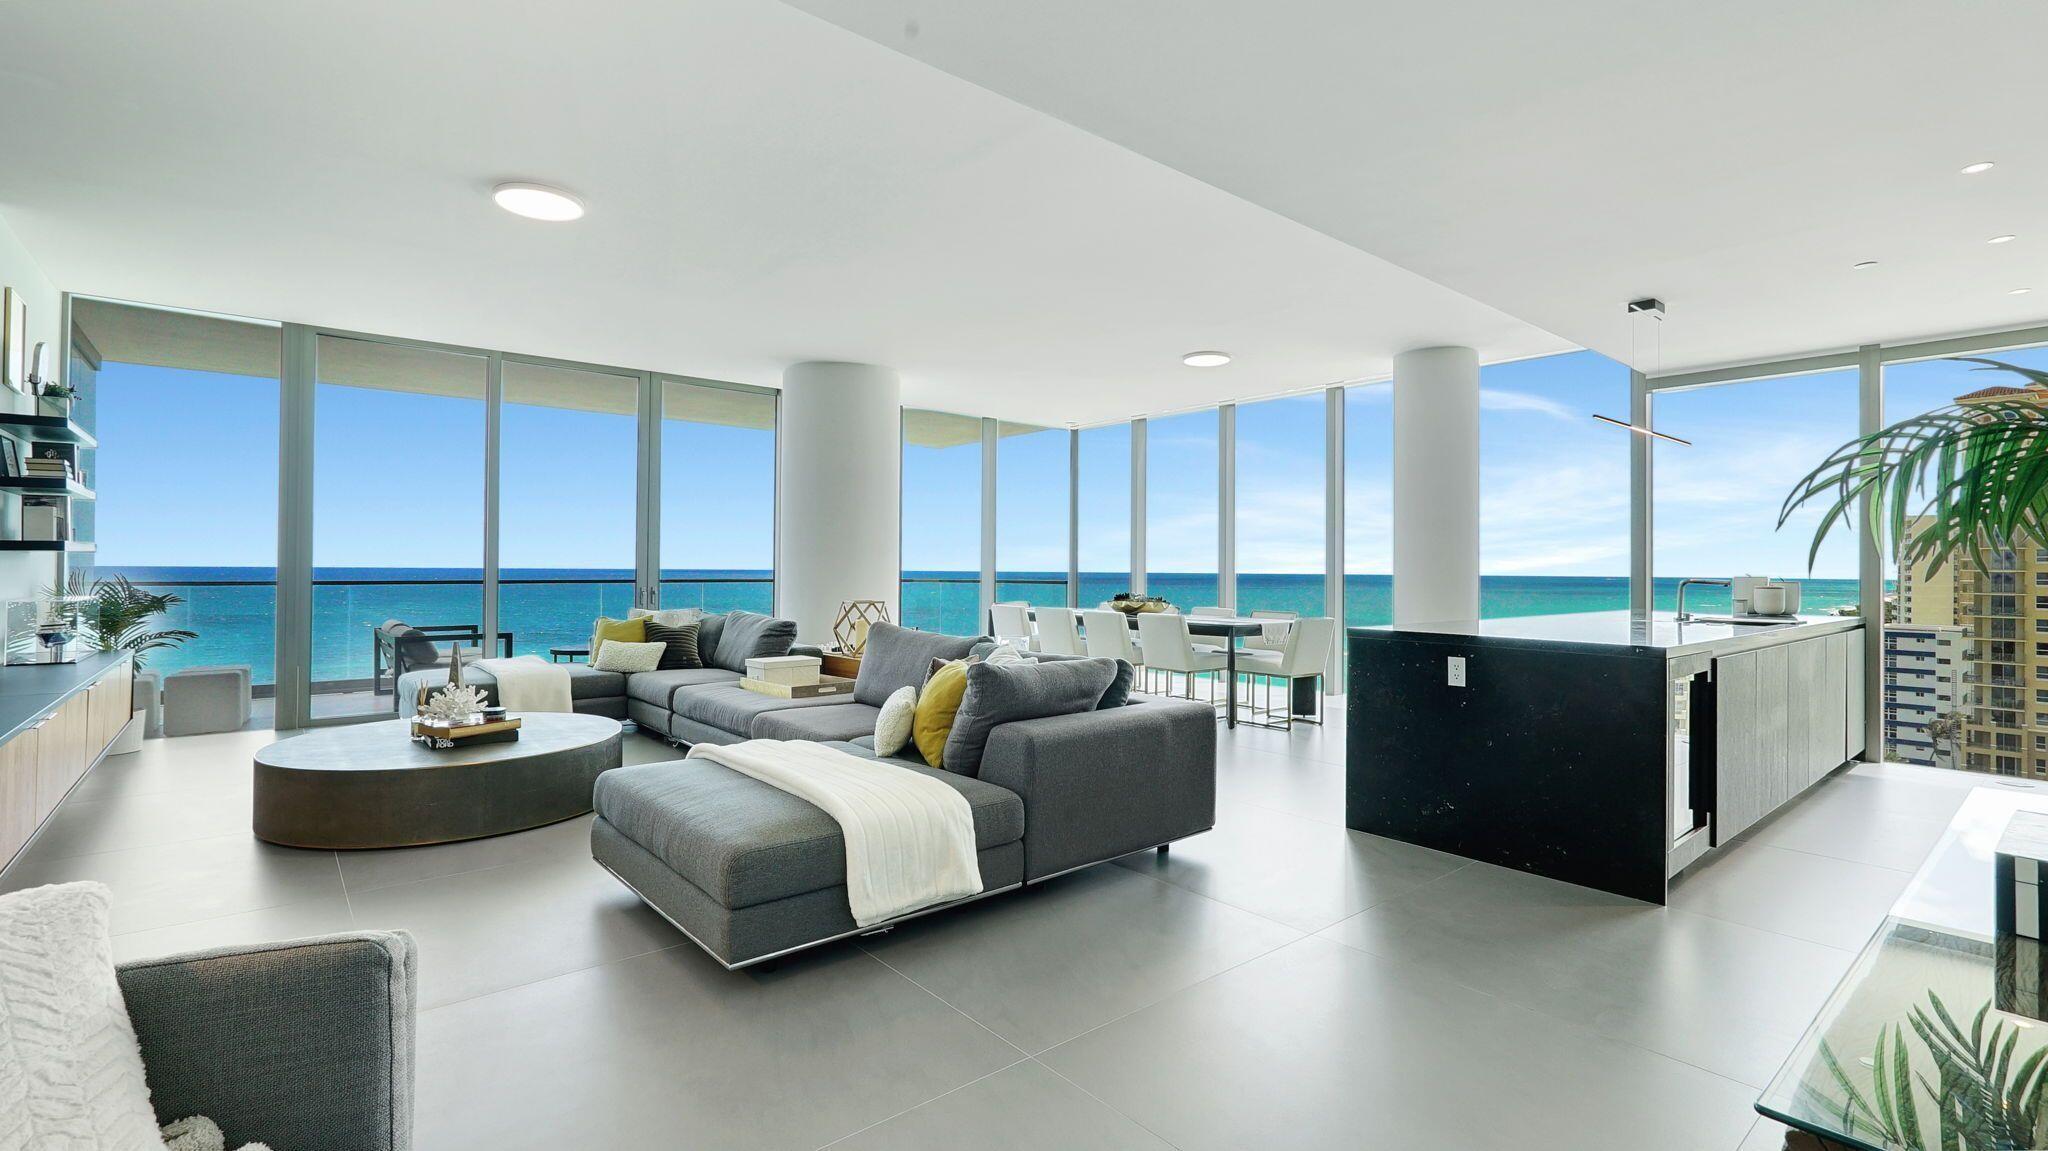 Property Image for 2000 S Ocean Drive 10b